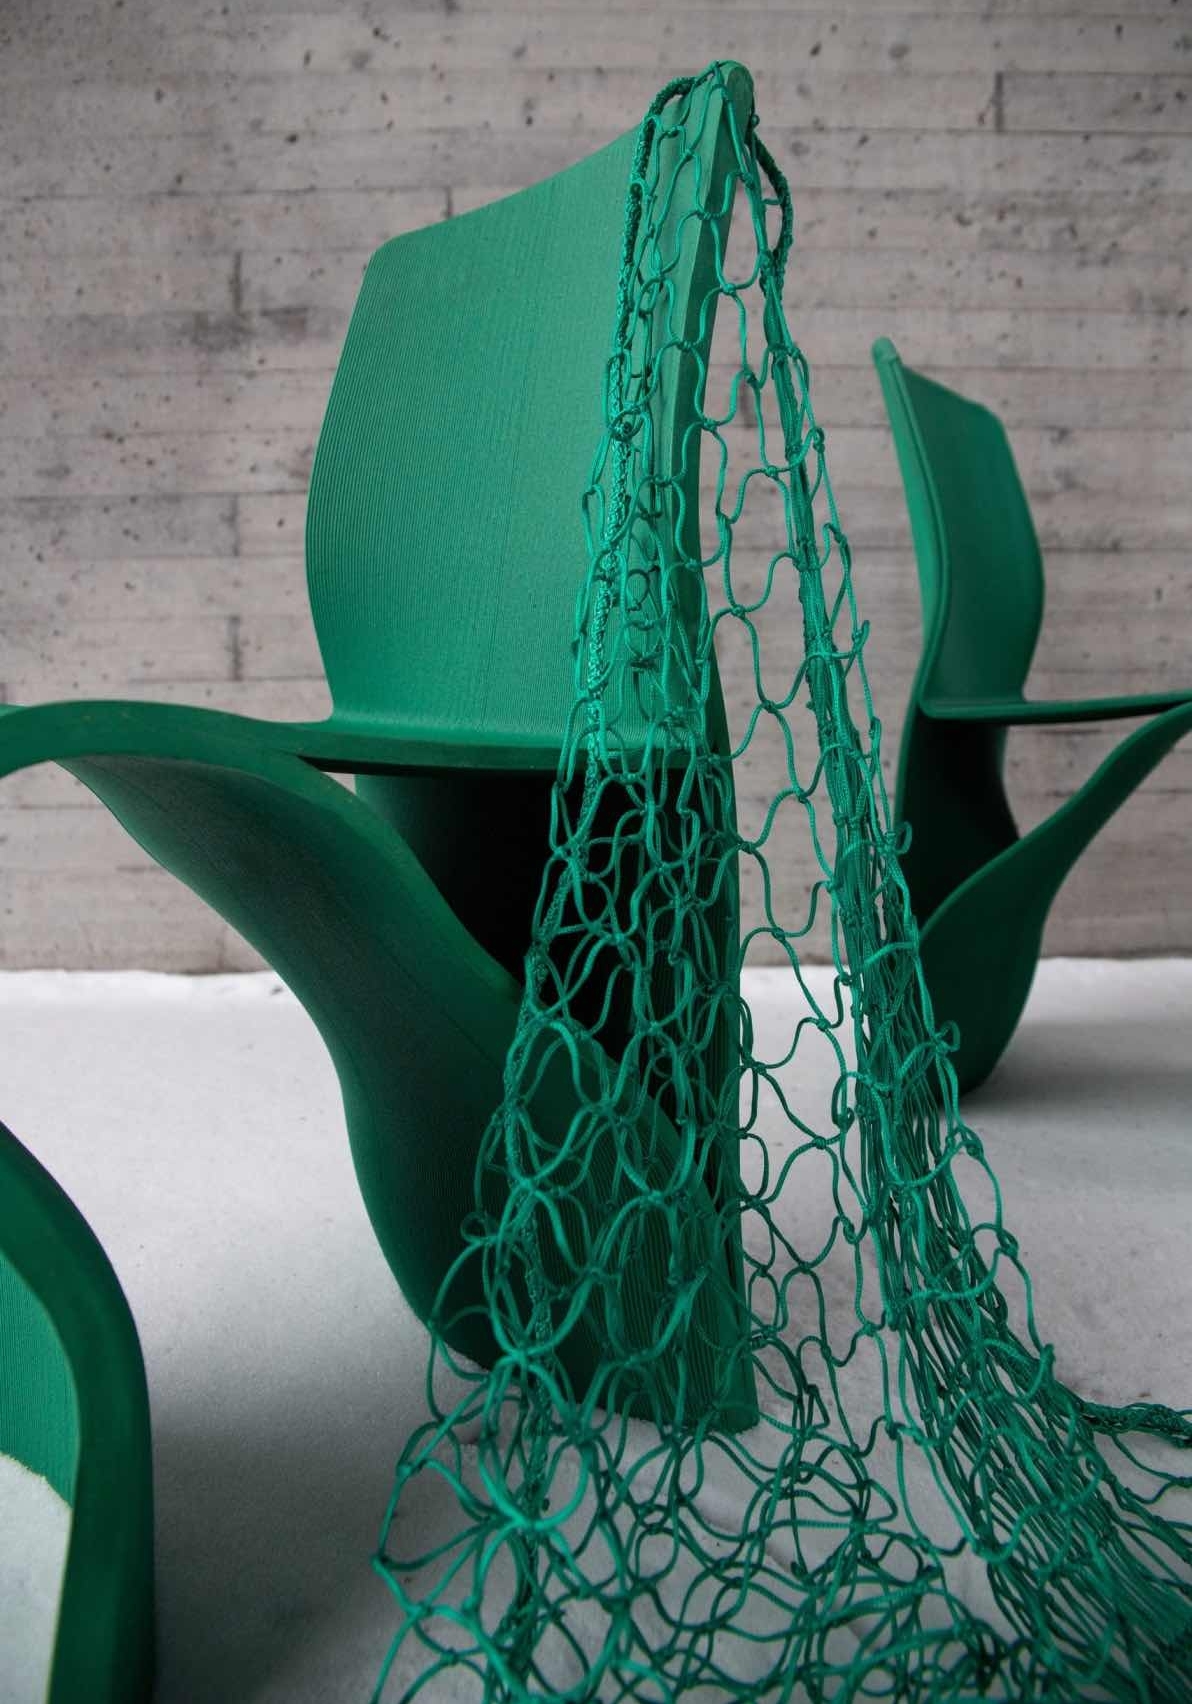 Kelp Collection: print innovation made from recycled fishing nets